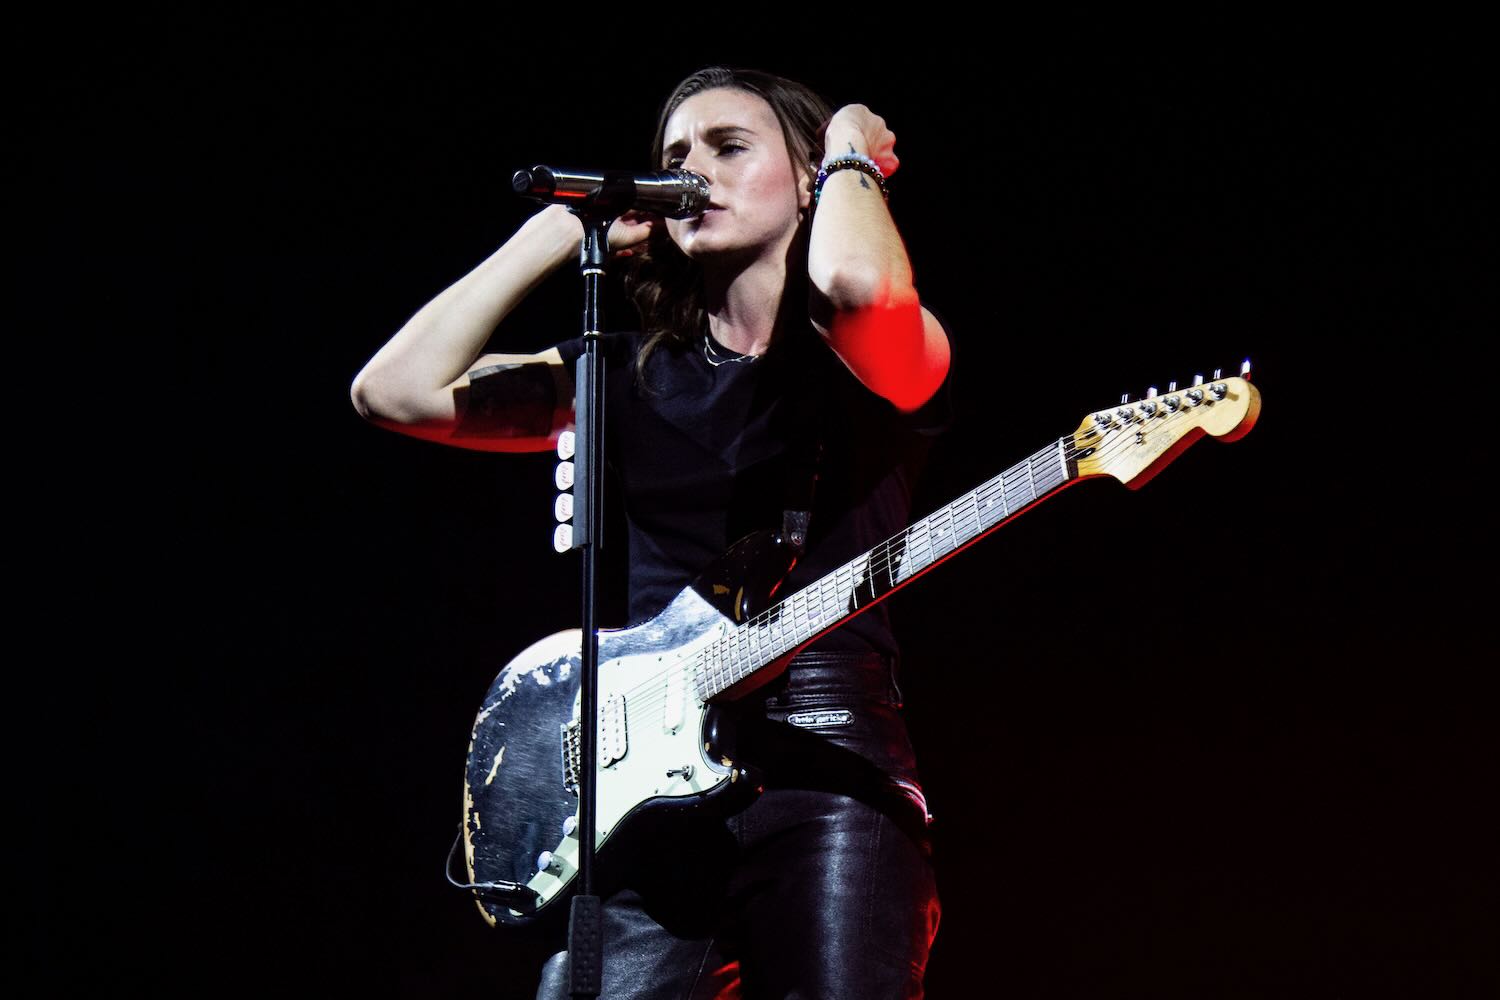 Poppy and PVRIS Tour 2023: Tickets, dates, venues, and more